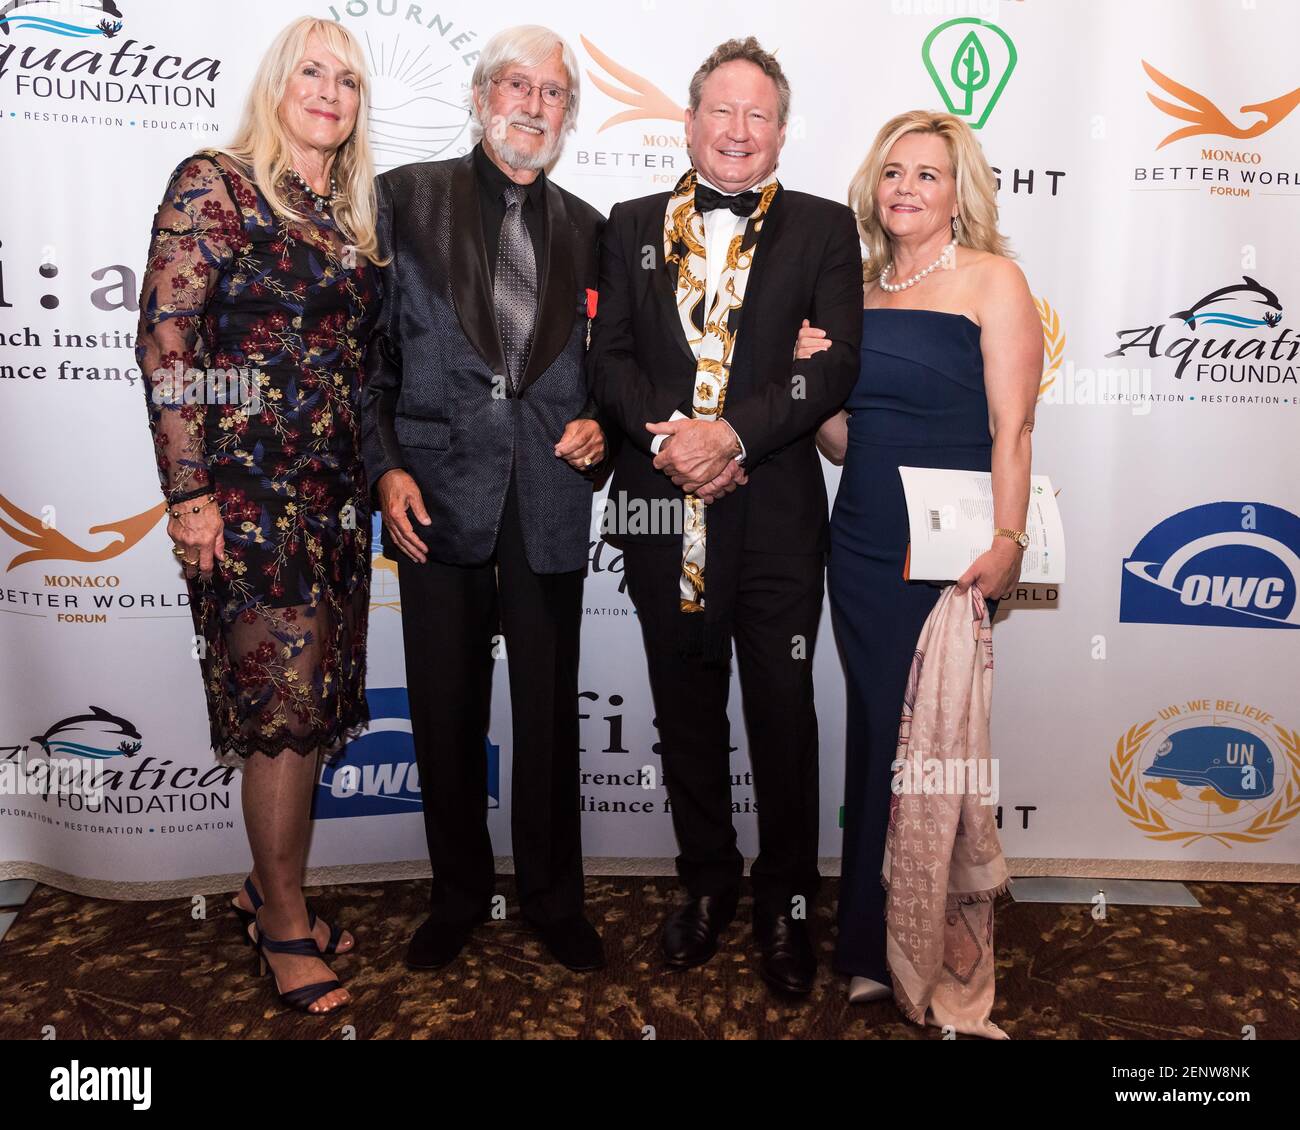 L-R) Nancy Marr, Jean-Michel Cousteau, Andrew Forrest, and Nicola Forrest  attend the Monaco Better World gala dinner at the Westin Grand Central on  September 22, 2019 in New York City.(Photo by Gabriele